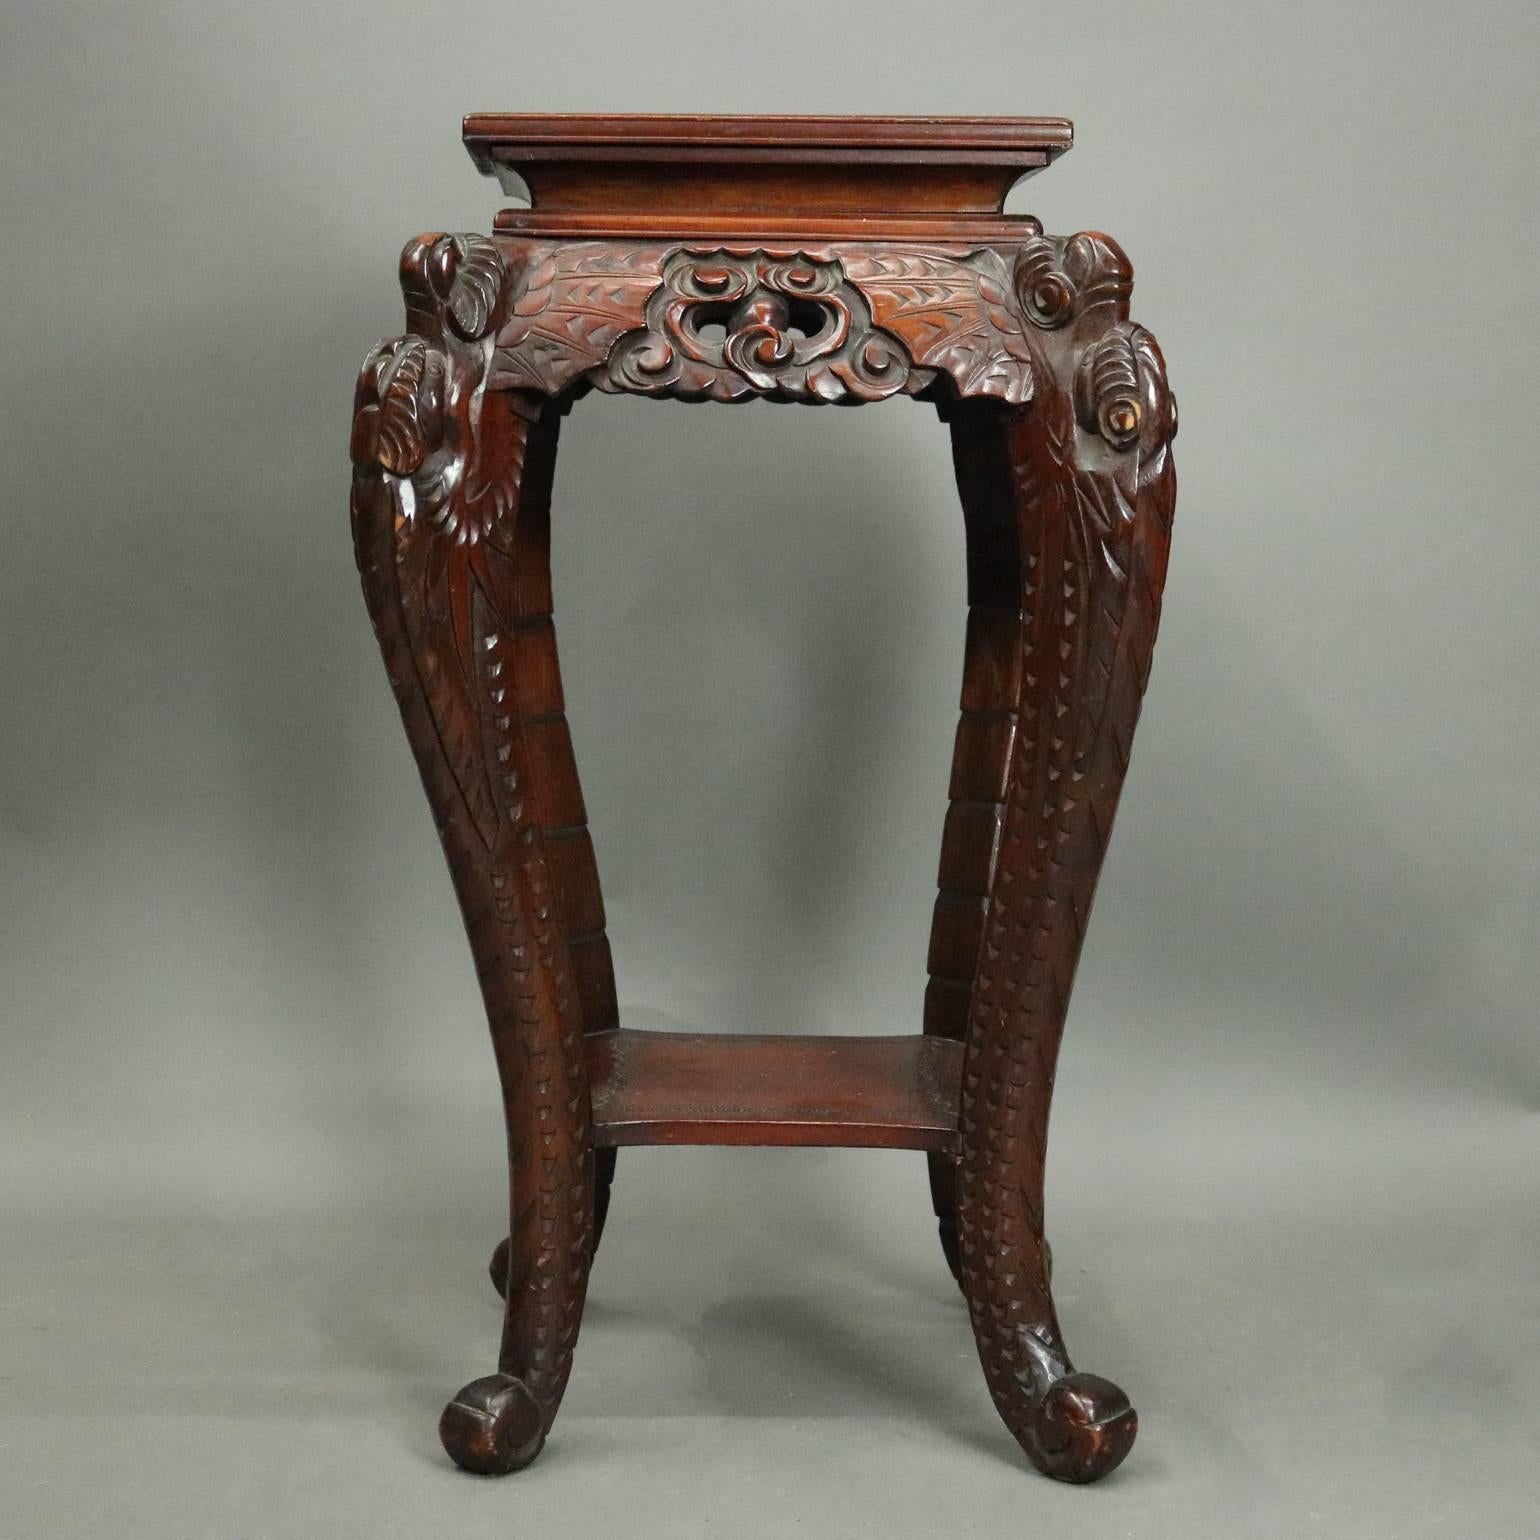 Vintage Chinese hardwood sculpture stand features heavily carved decoration including pierced apron, batwing, scroll, foliate and scale decoration, cabriole legs, incised top and lower shelf, circa 1950.

Measures - 30" H X 18" W X